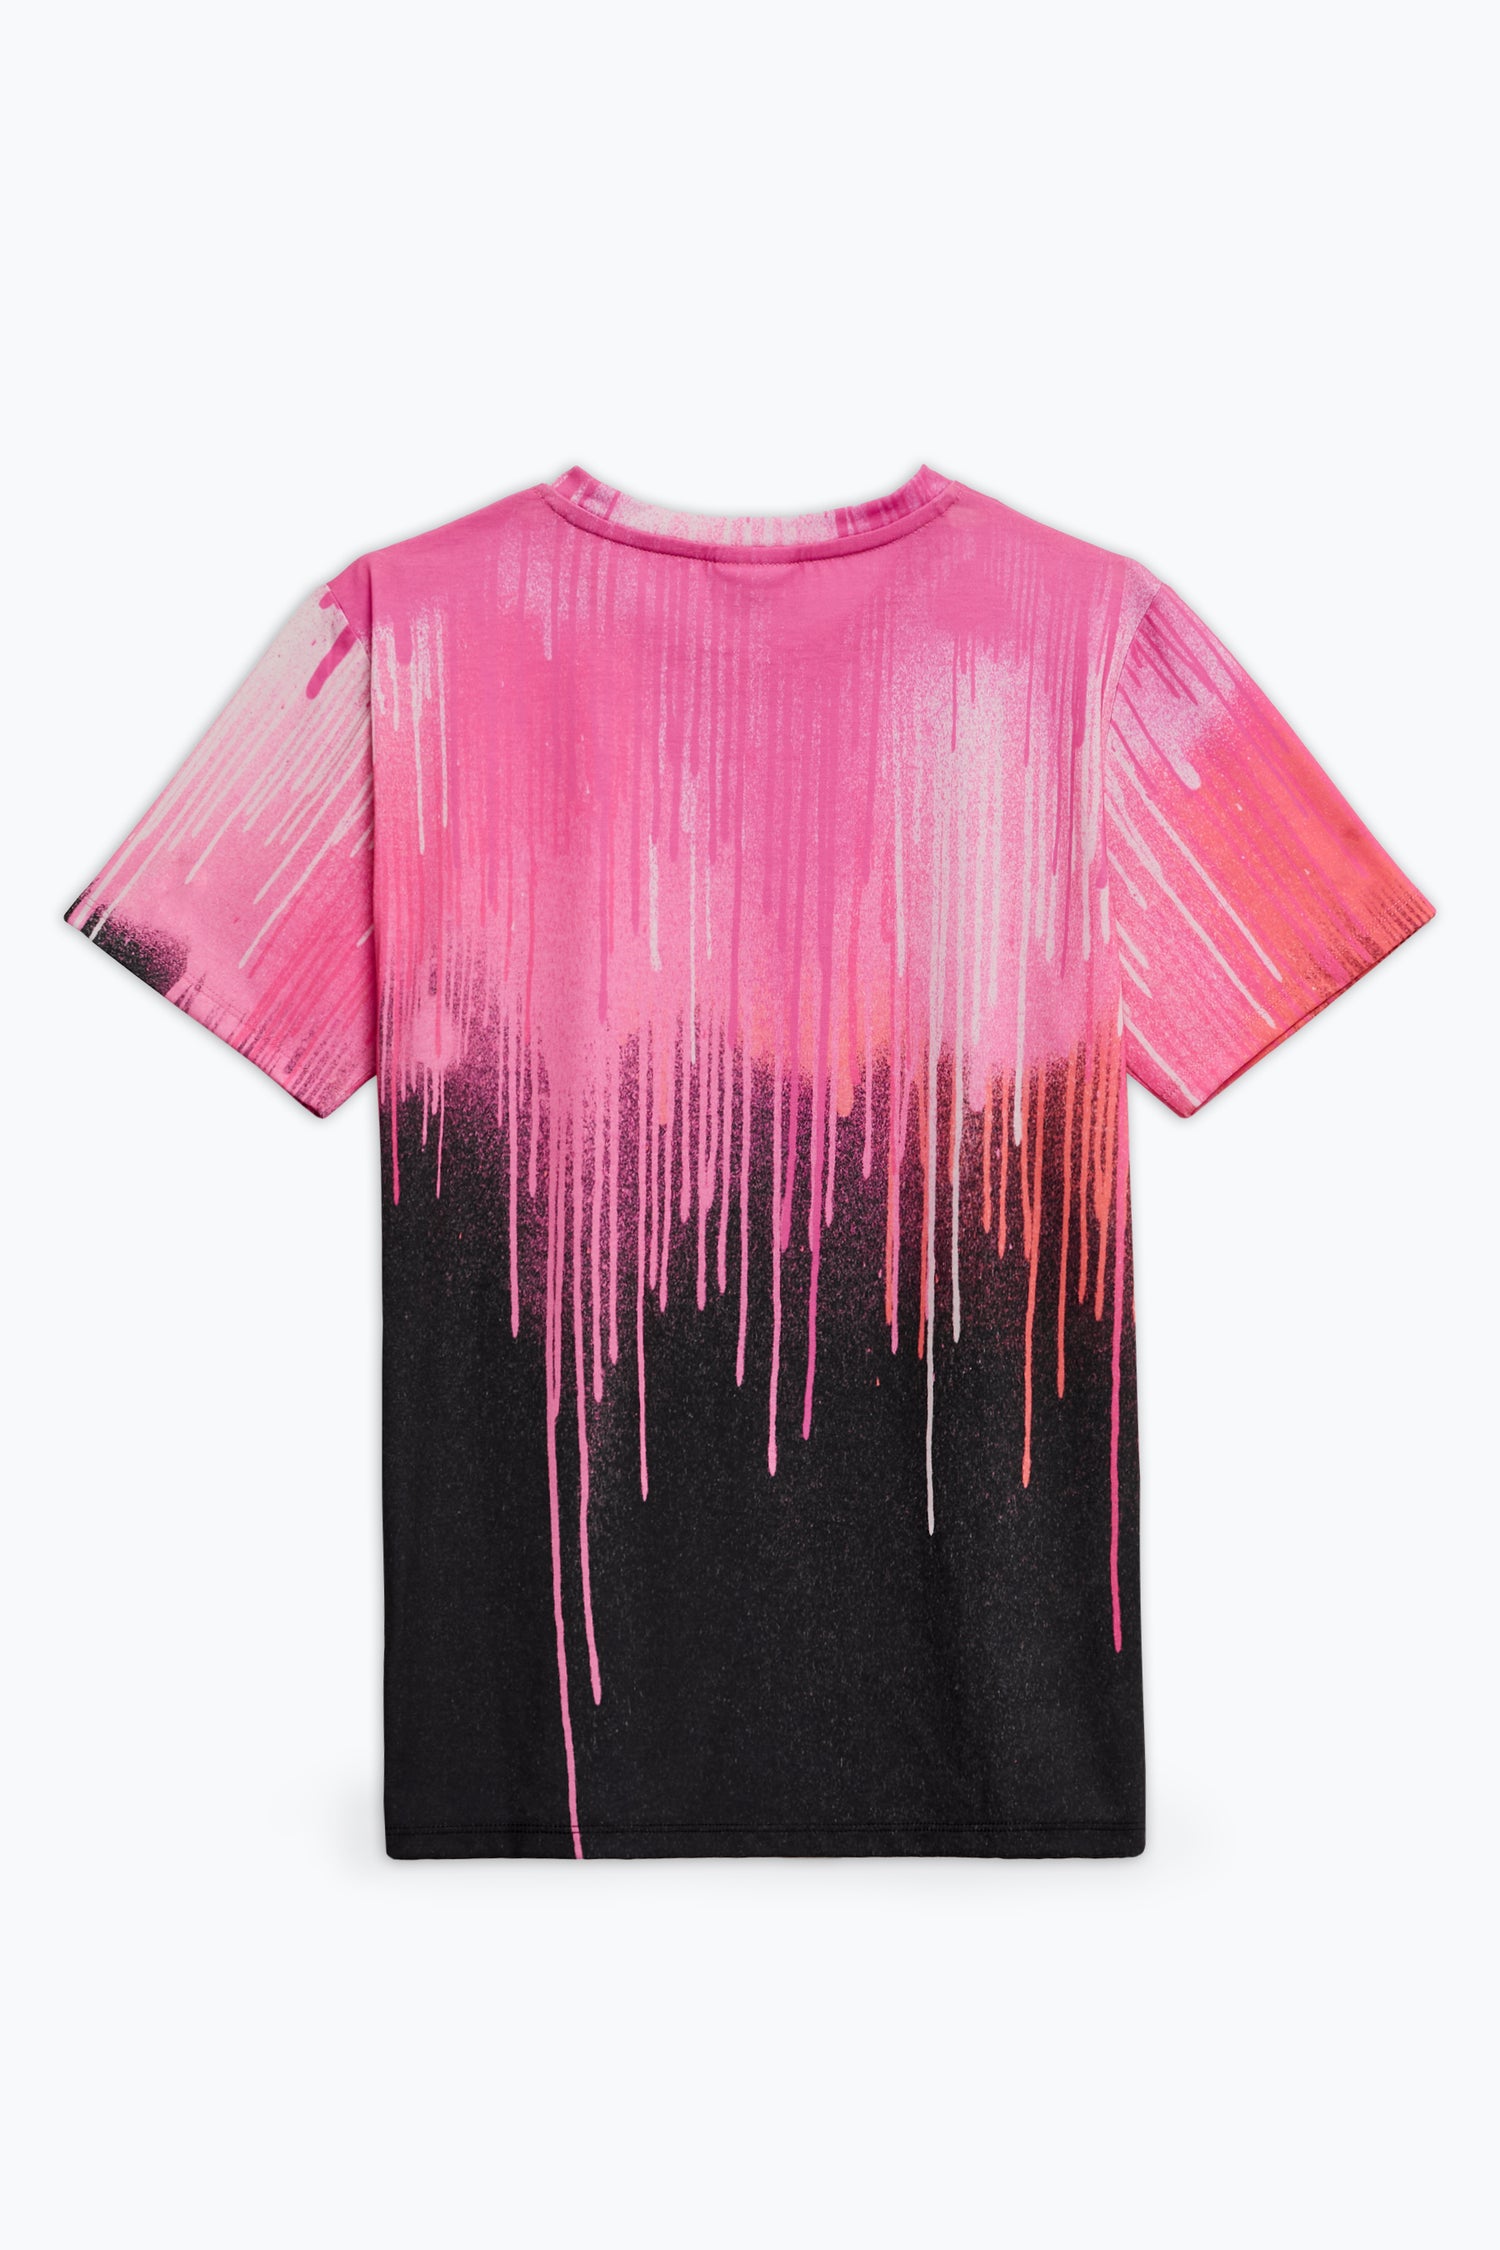 Pink Scrunch tie dye t shirt, hand crafted in the U.K